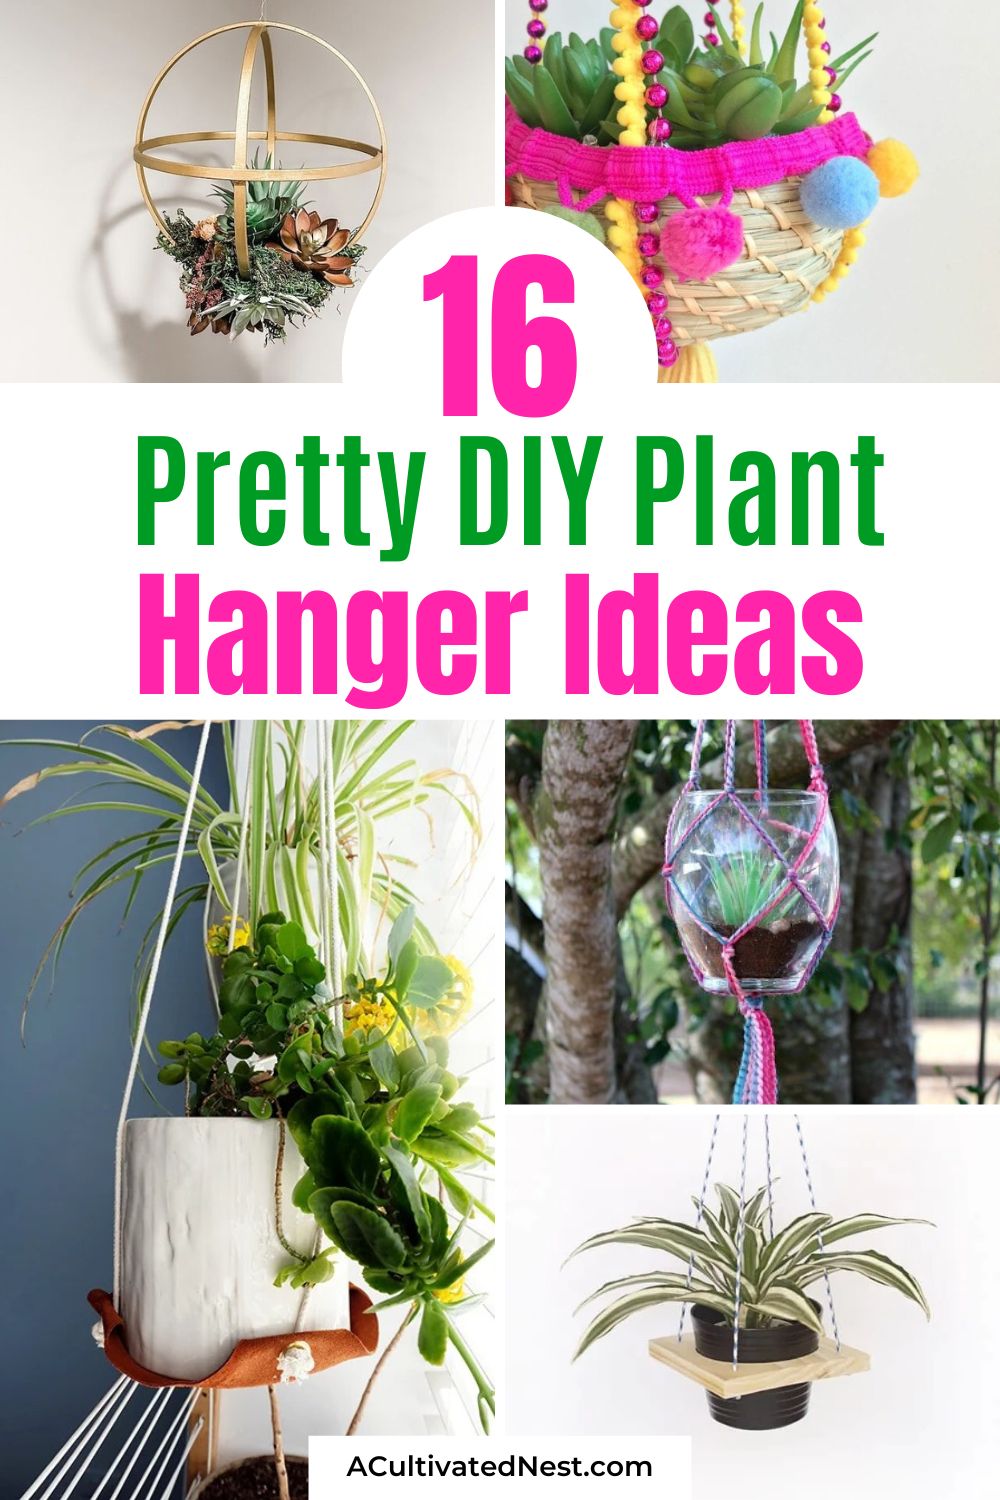 16 Pretty DIY Plant Hangers- Ready to give your plants a stylish new home? Explore our collection of DIY plant hanger ideas perfect for any skill level. Whether you're into boho chic macramé or rustic woodwork, there's something for everyone! | #PlantLovers #DIYProjects #plantHangers #indoorGarden #ACultivatedNest